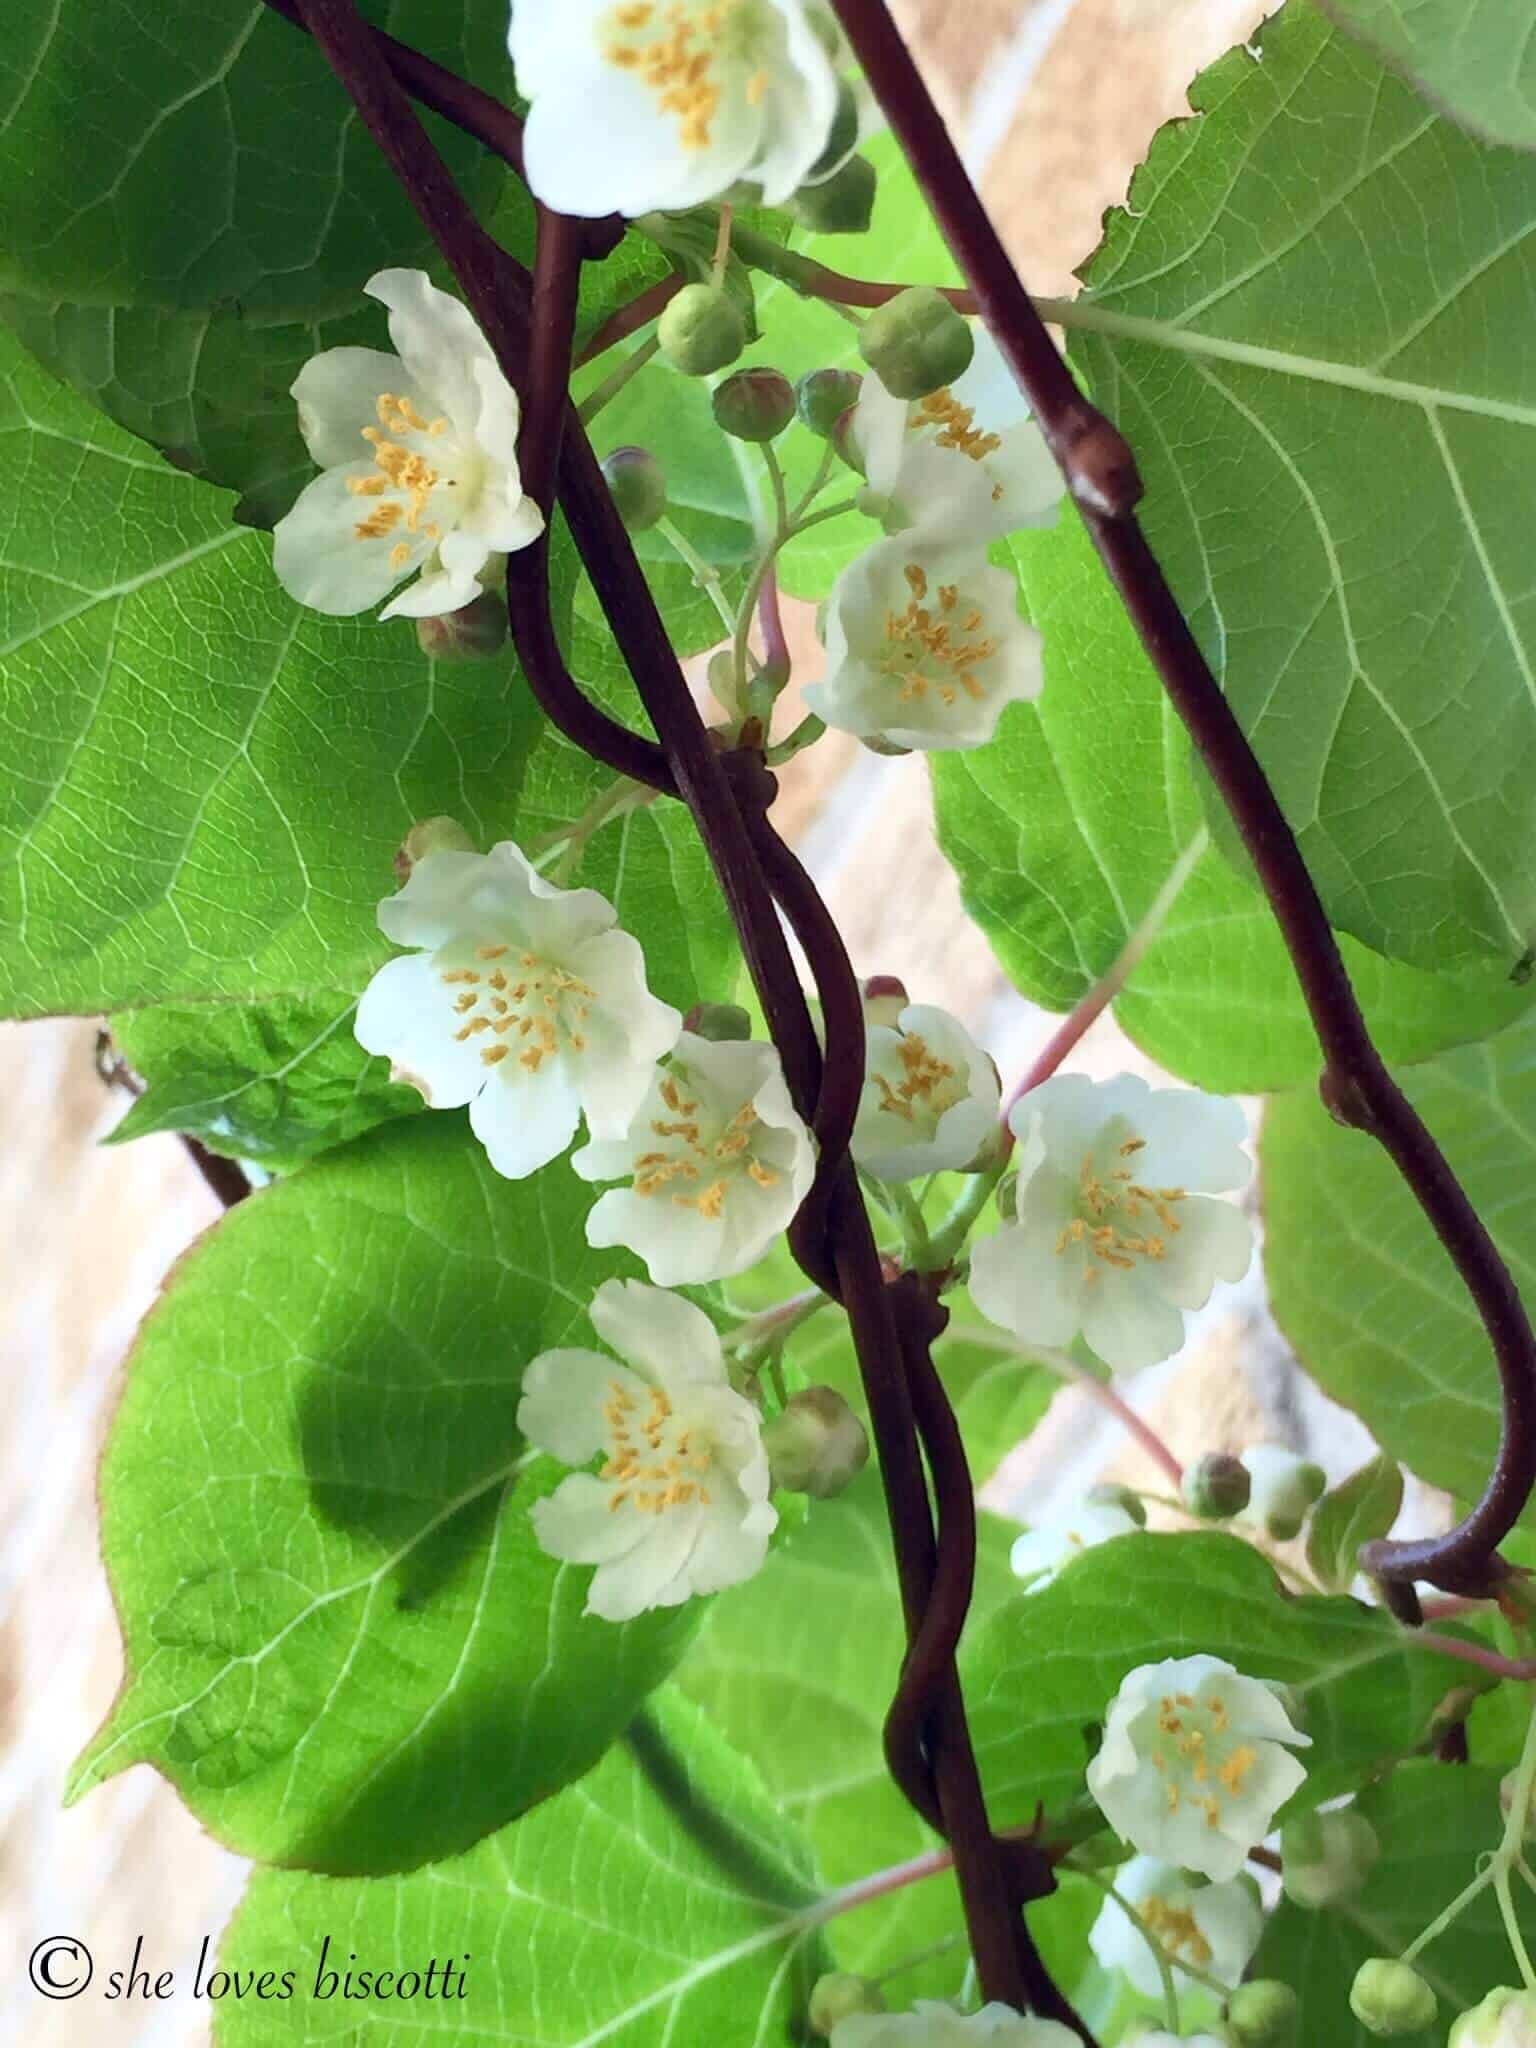 A kiwi vine in full bloom with white flowers.